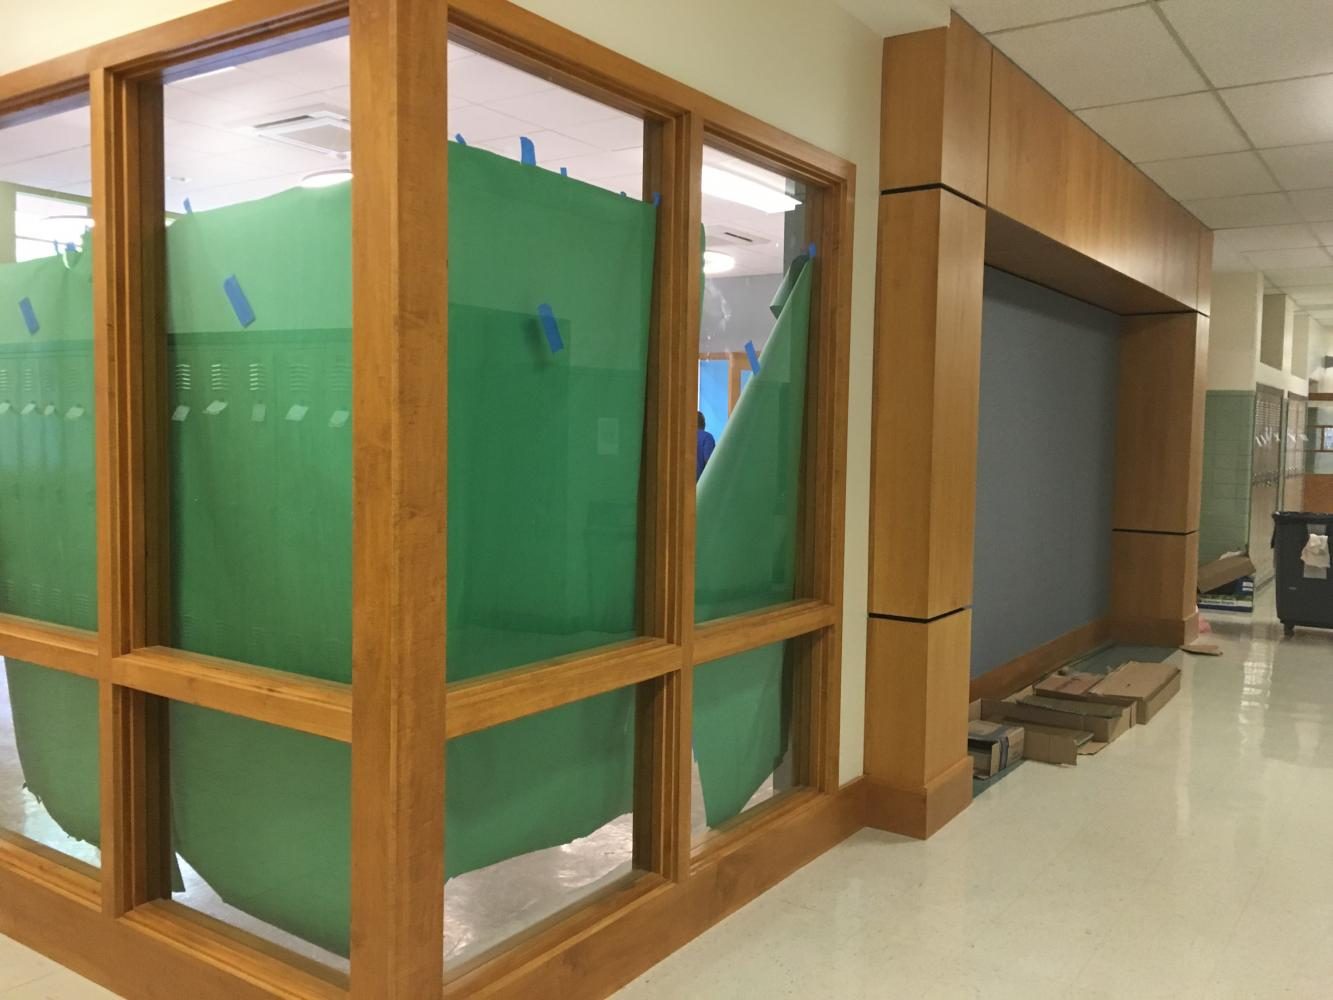 Campus ministry is under wraps while construction is completed. 